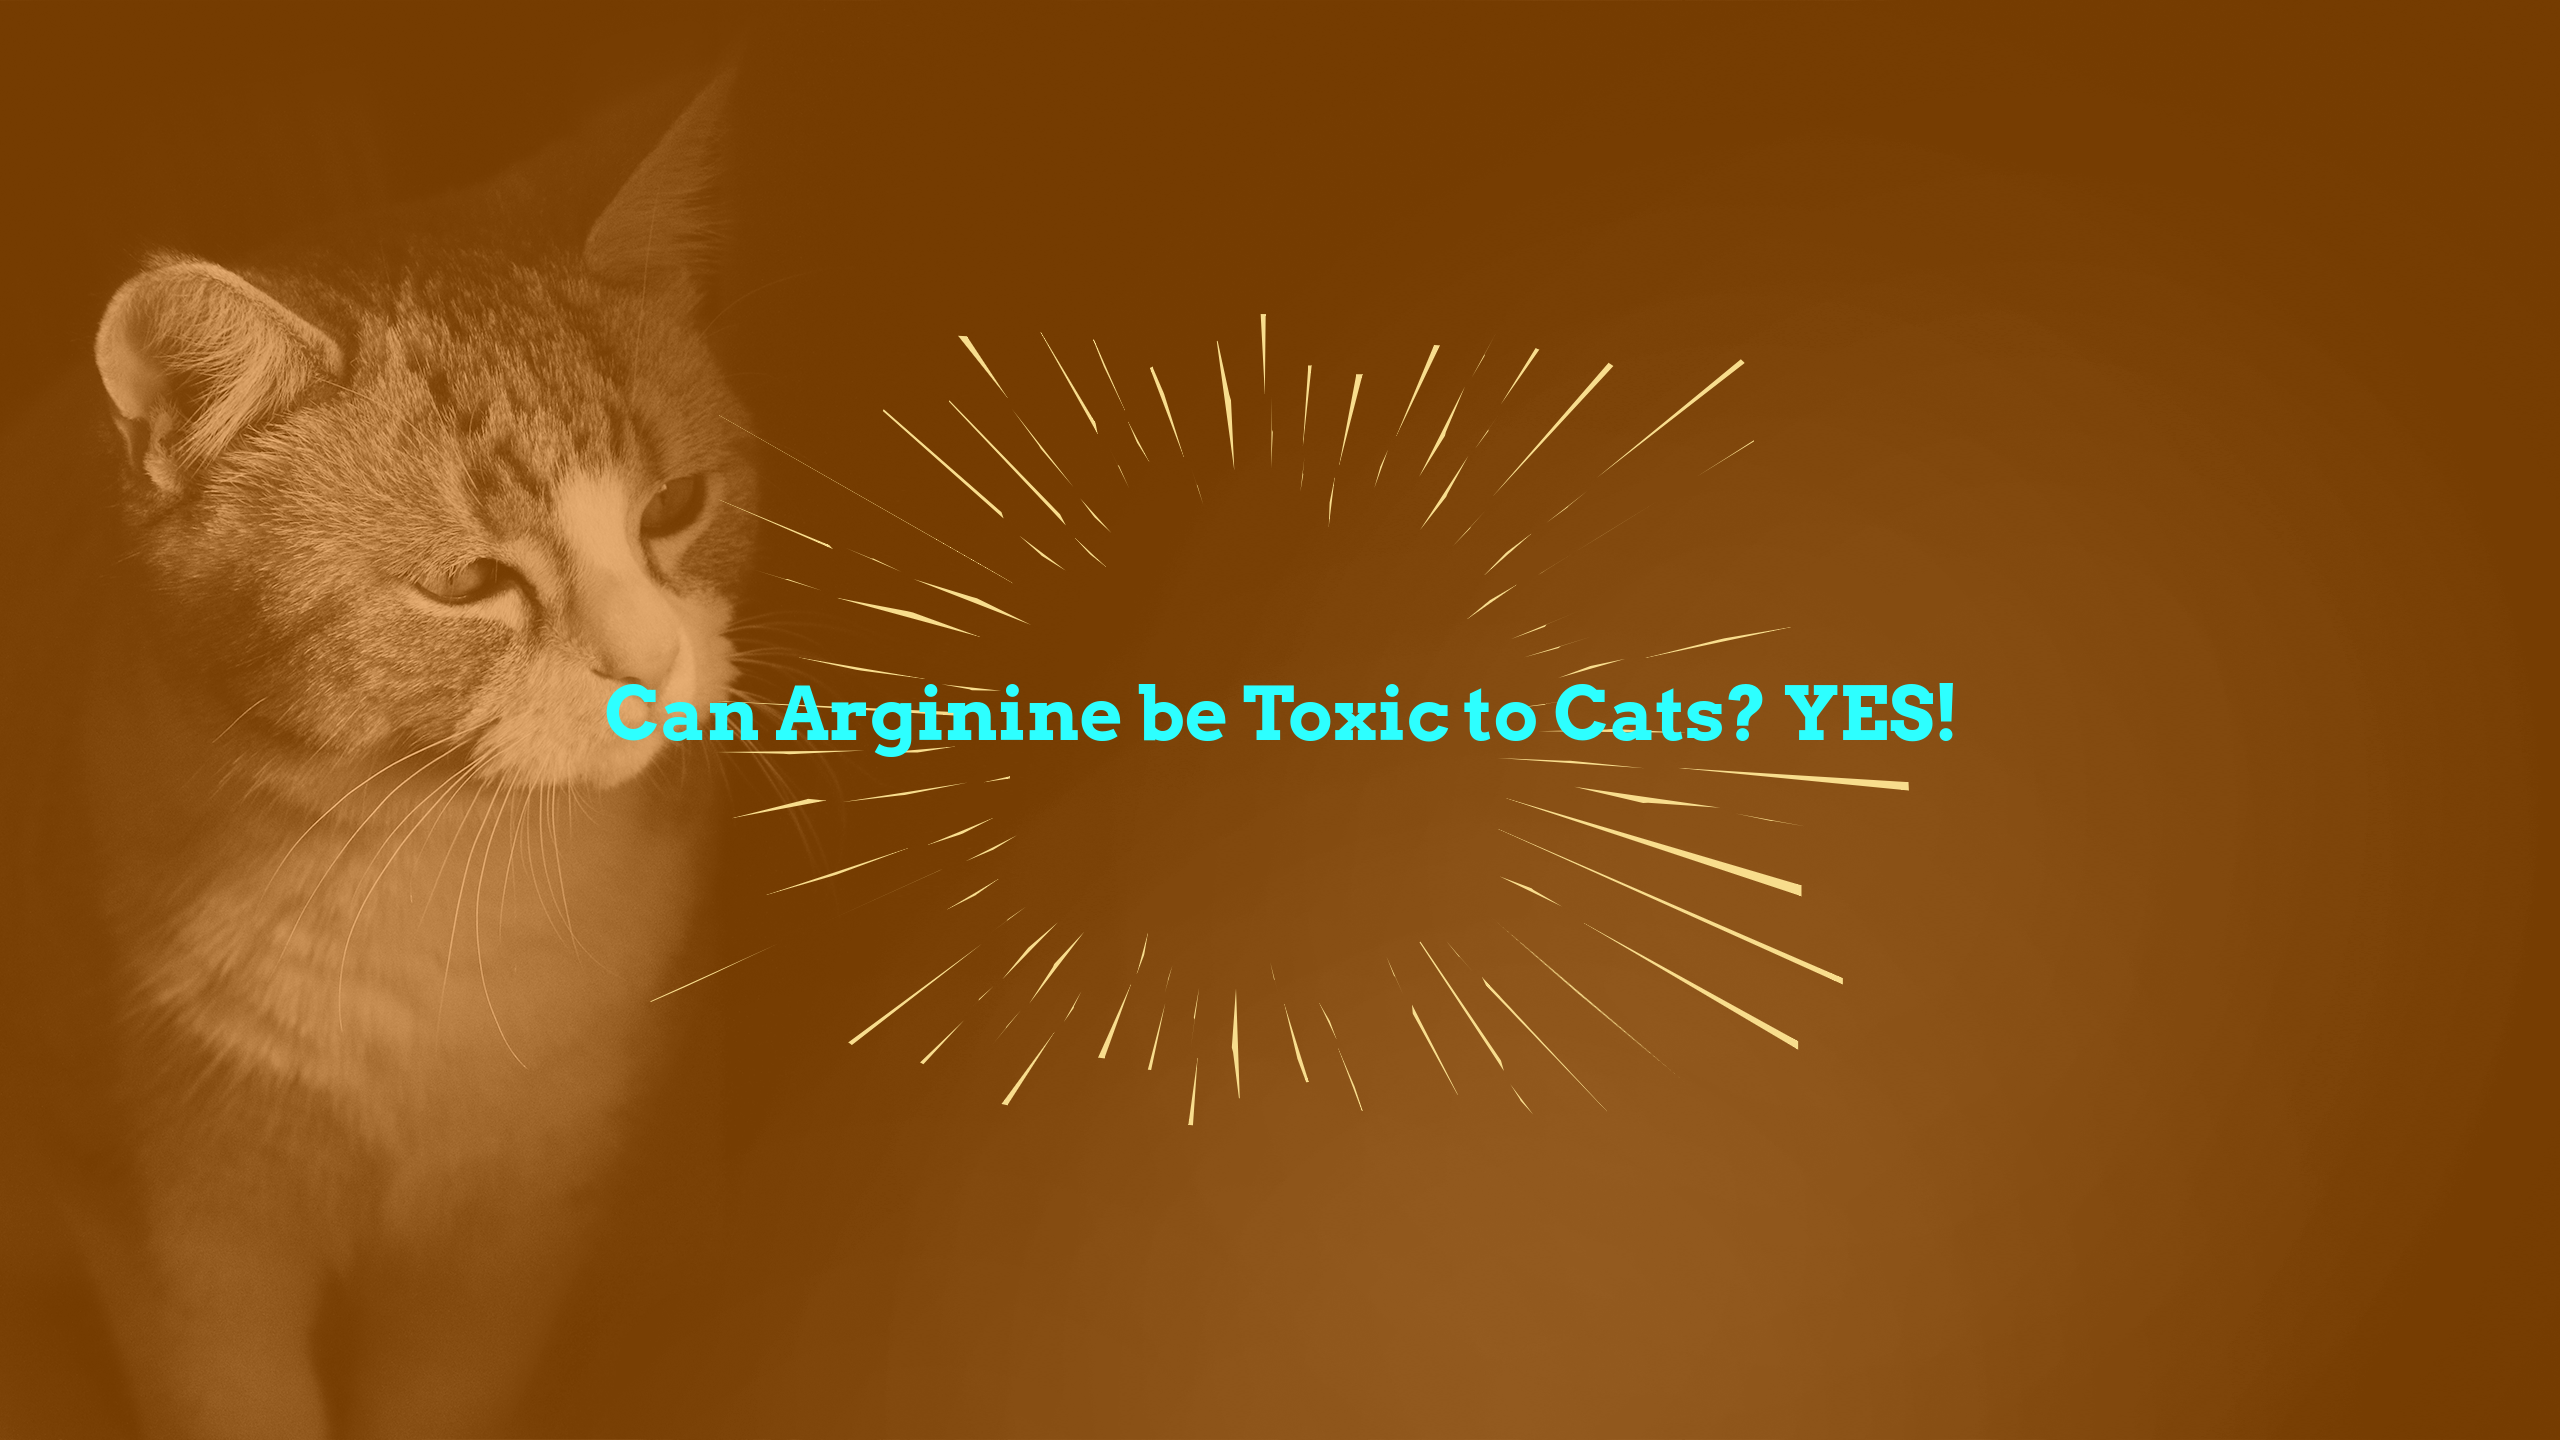 Can Arginine be Toxic to Cats? YES!